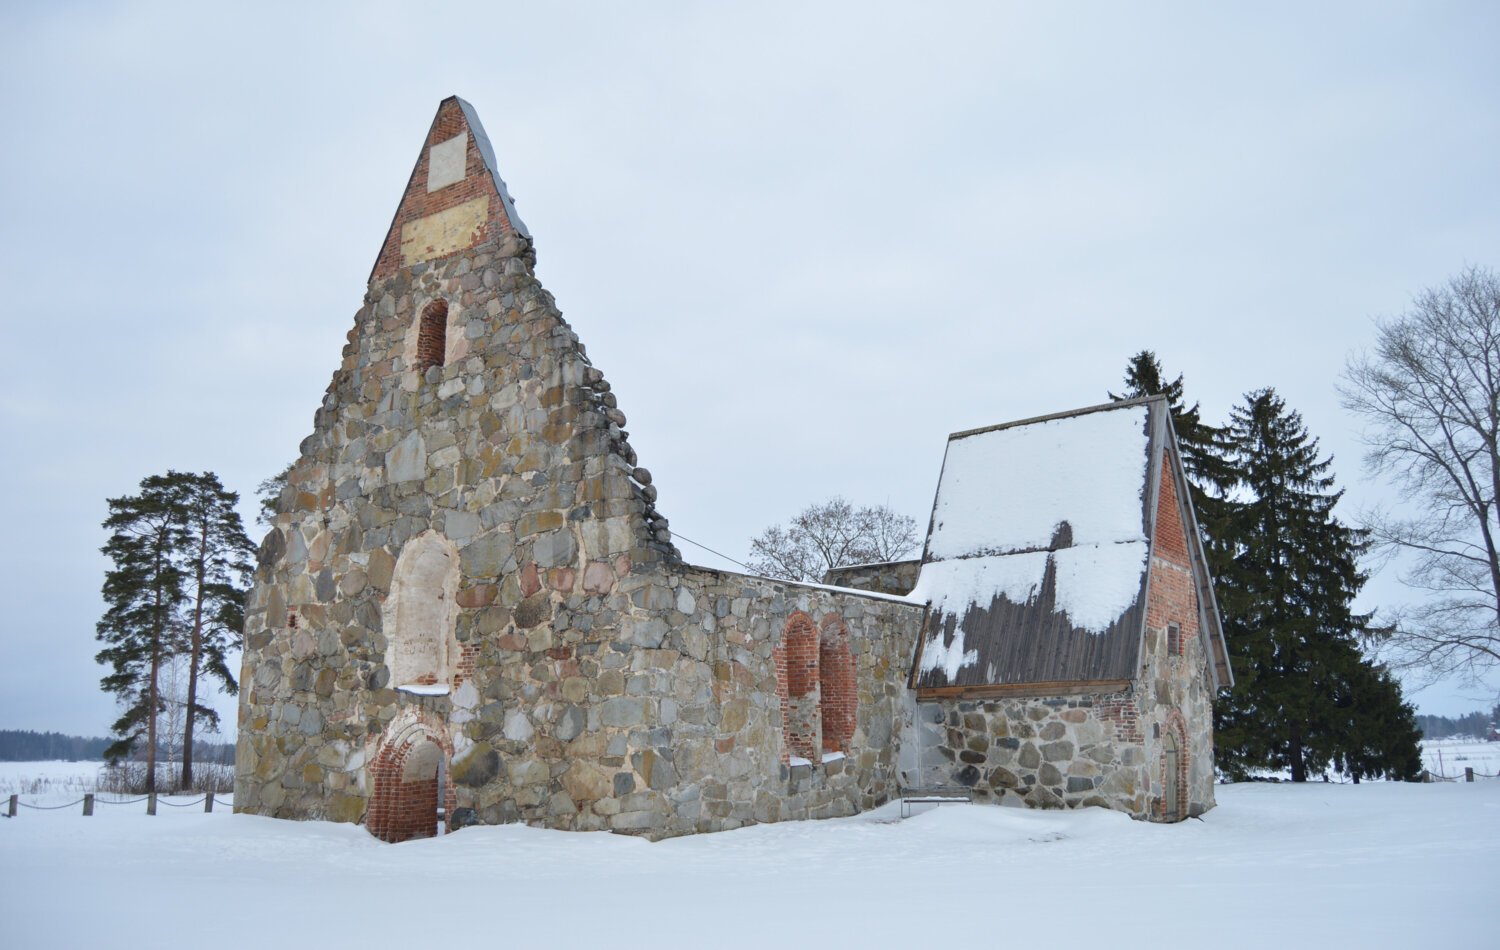 The church ruin in the old cemetery in Pälkäne. This is where a large number of the total of 82 remains to be returned from KI to Finland come from.